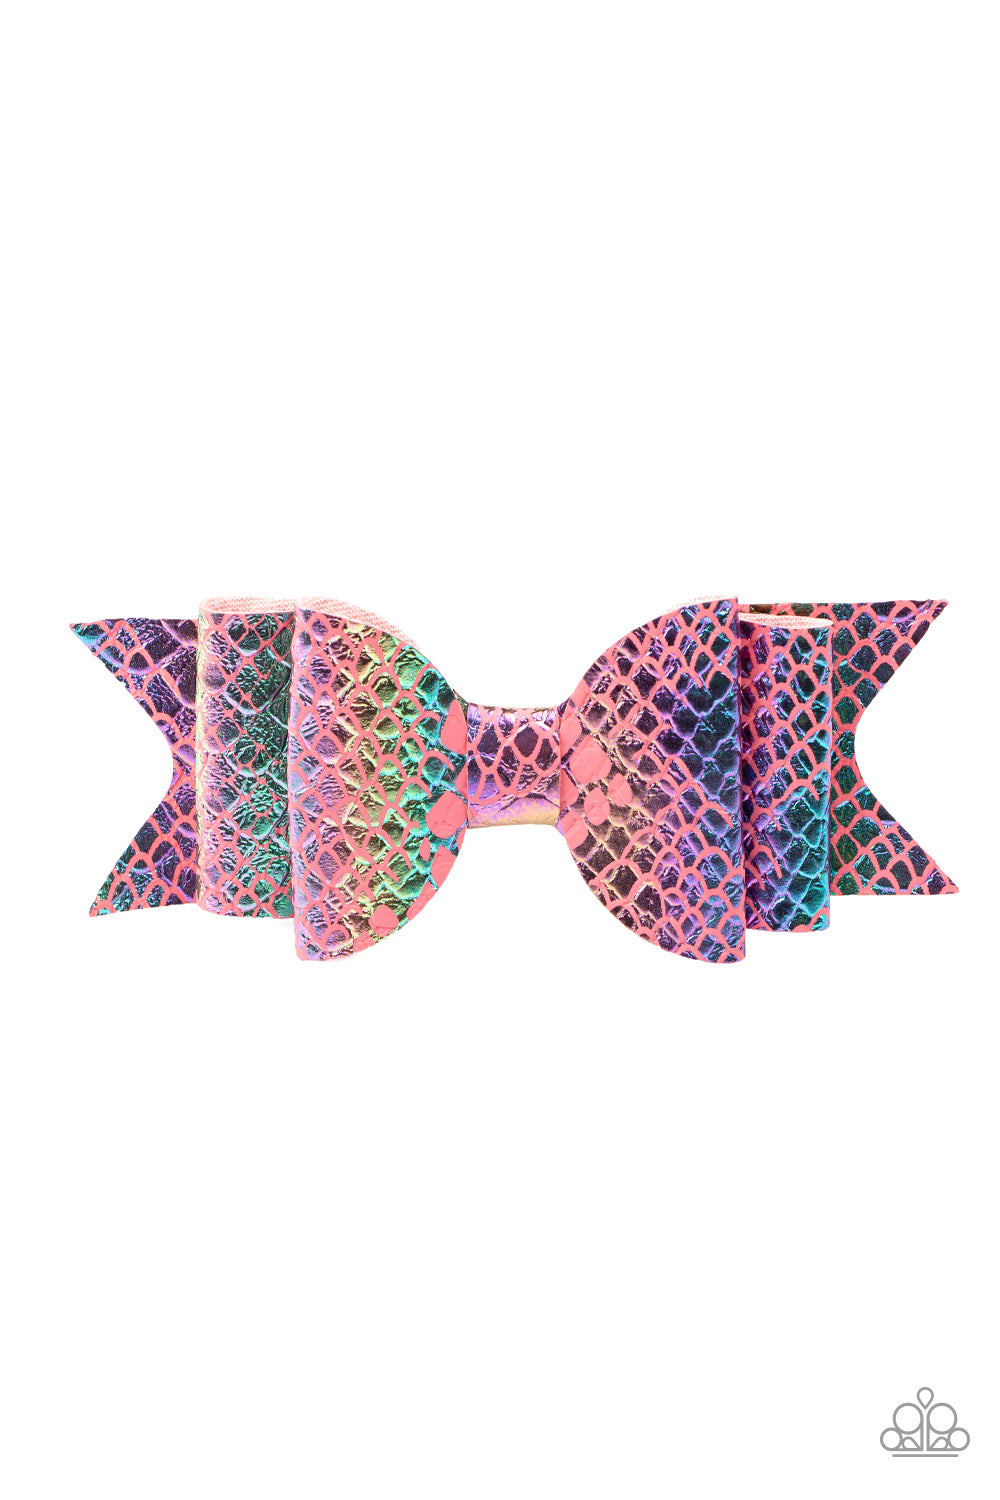 BOW Your Mind - Pink Hair Accessory Paparazzi Accessories